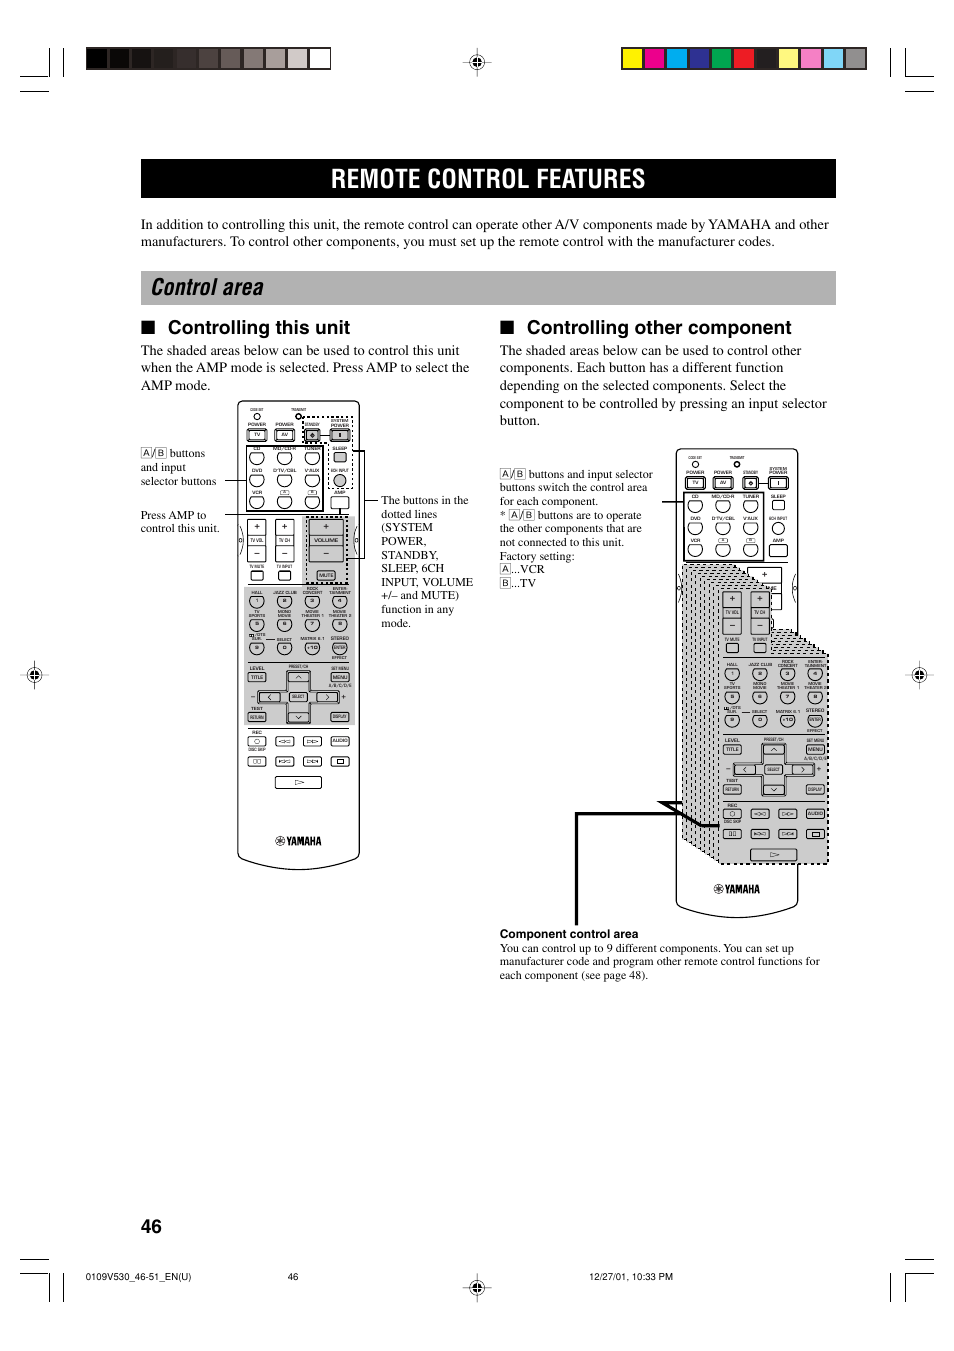 Remote control features, Control area, Controlling this unit | Yamaha RX- V530 User Manual | Page 50 / 67 | Original mode